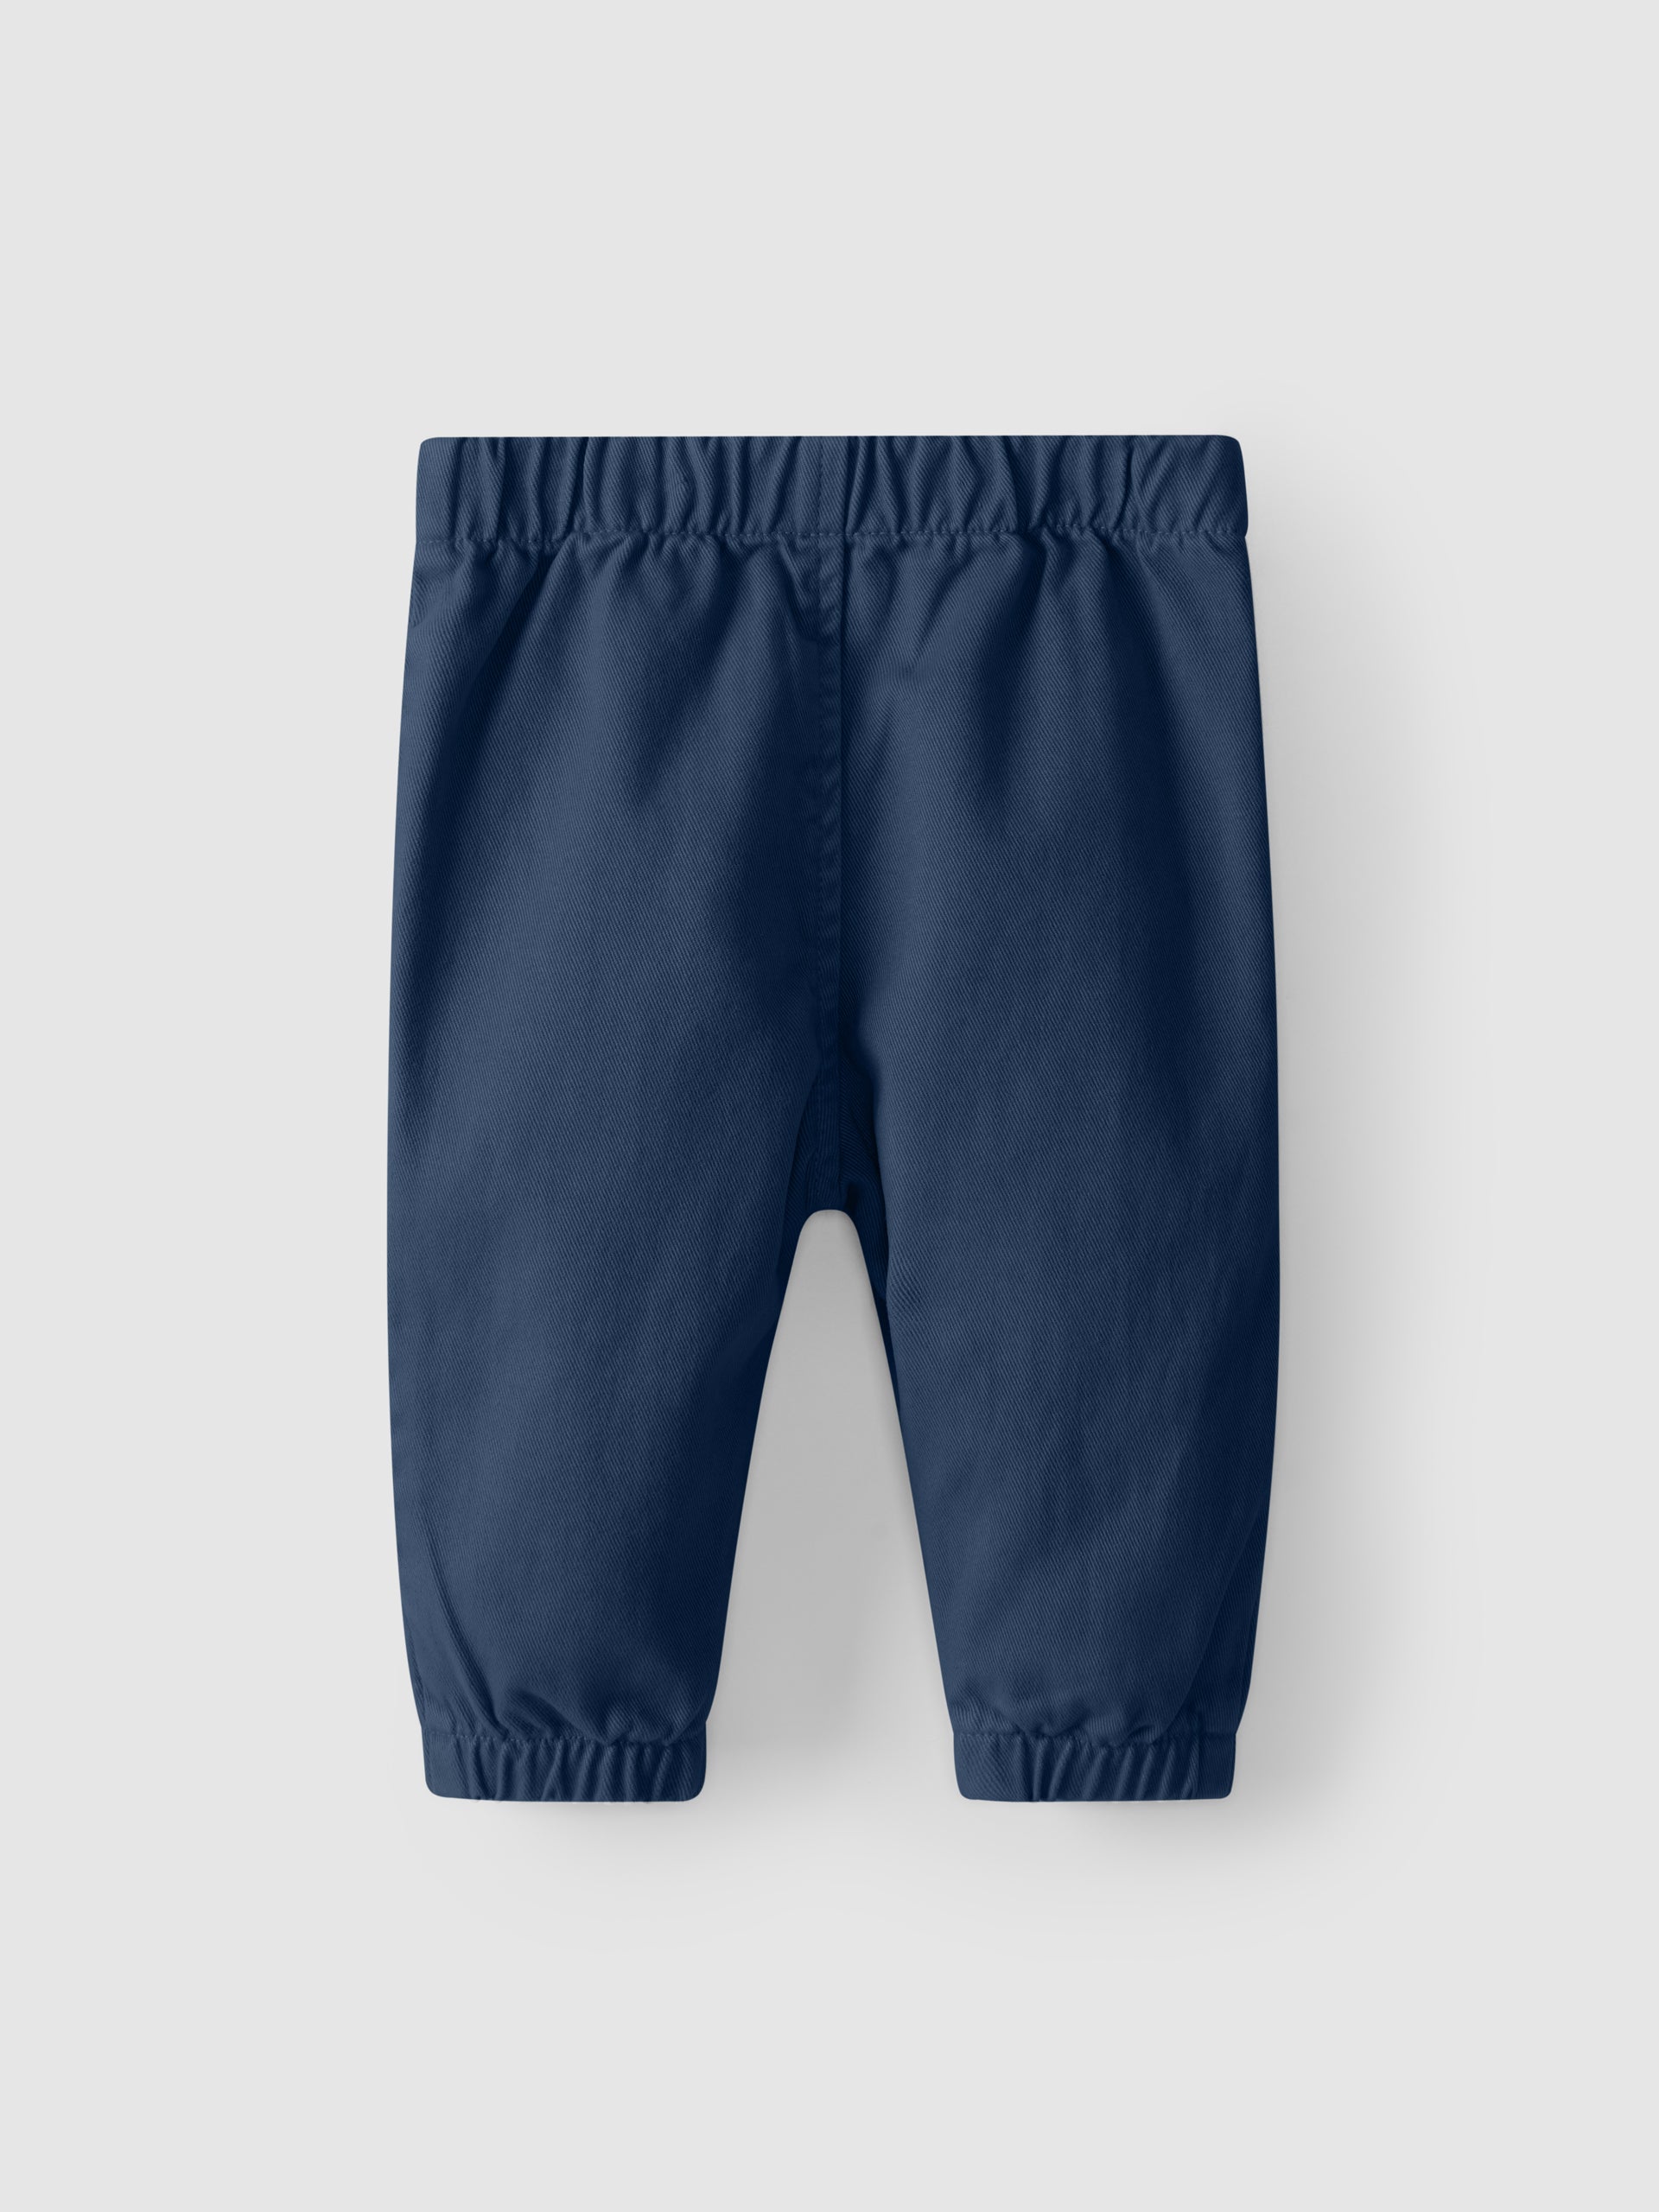 Twill pull-up pants